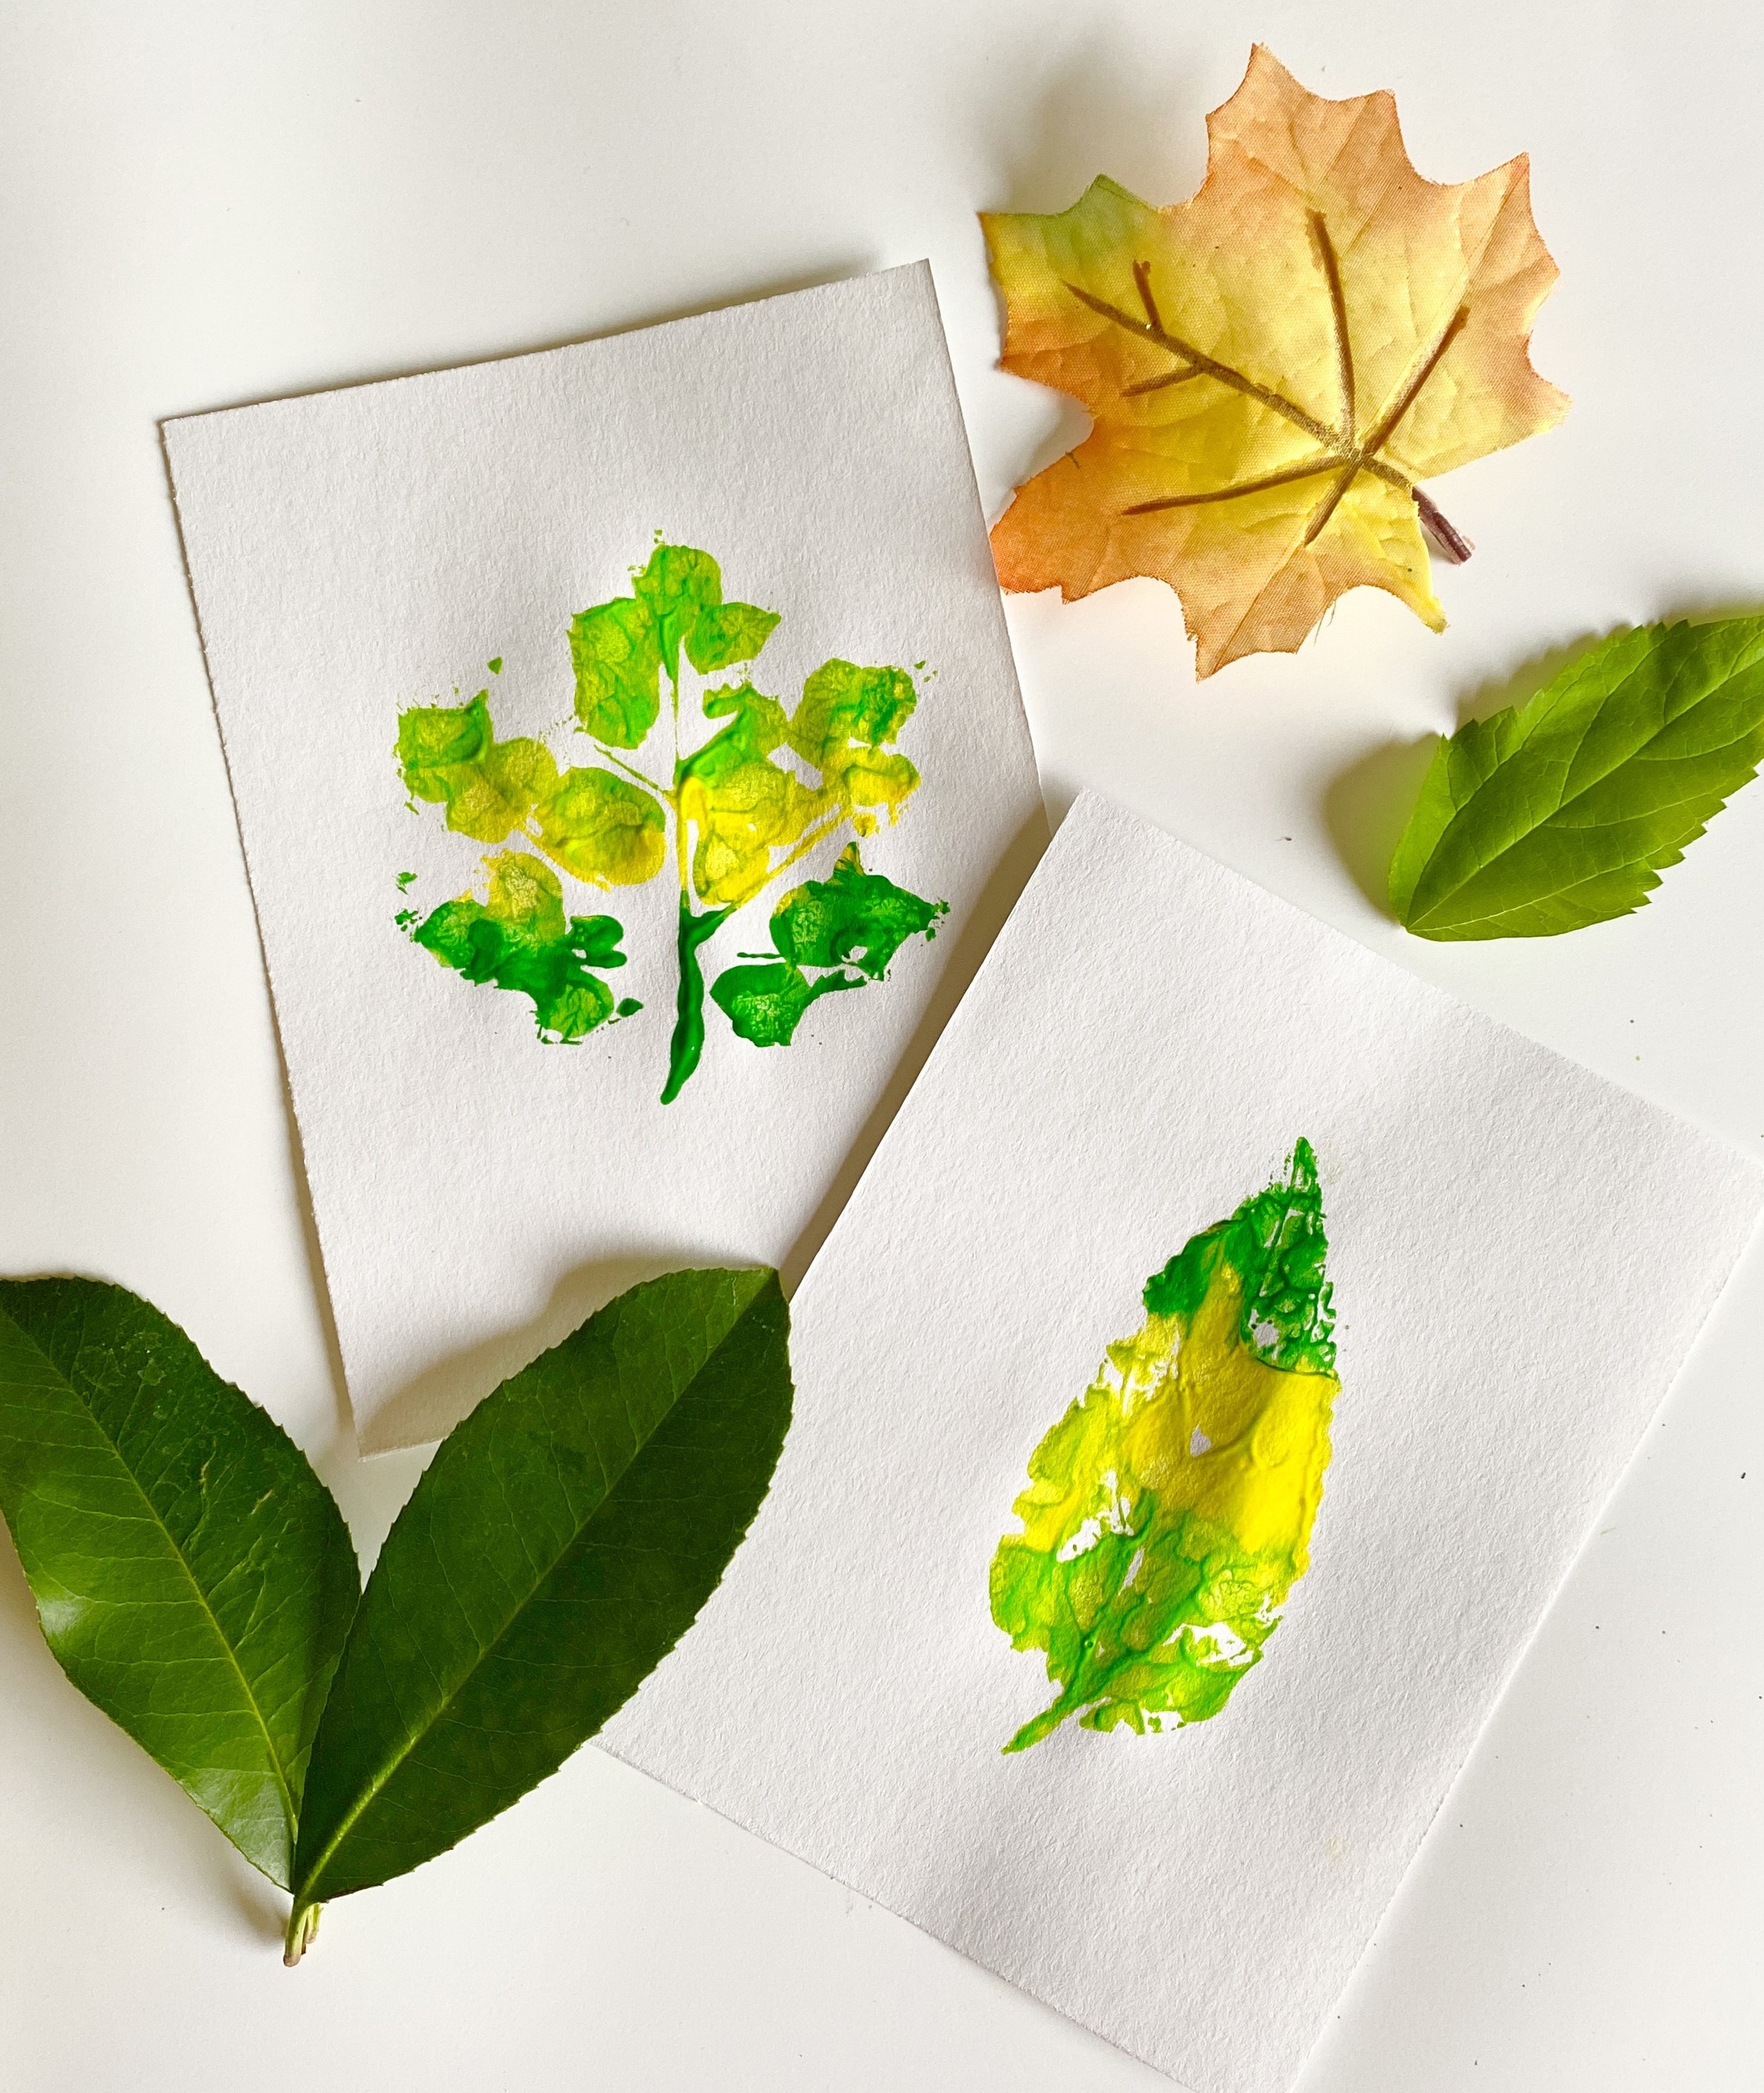 Fun With Leaves: Leaf Prints, Patterning with Leaves, Make Your